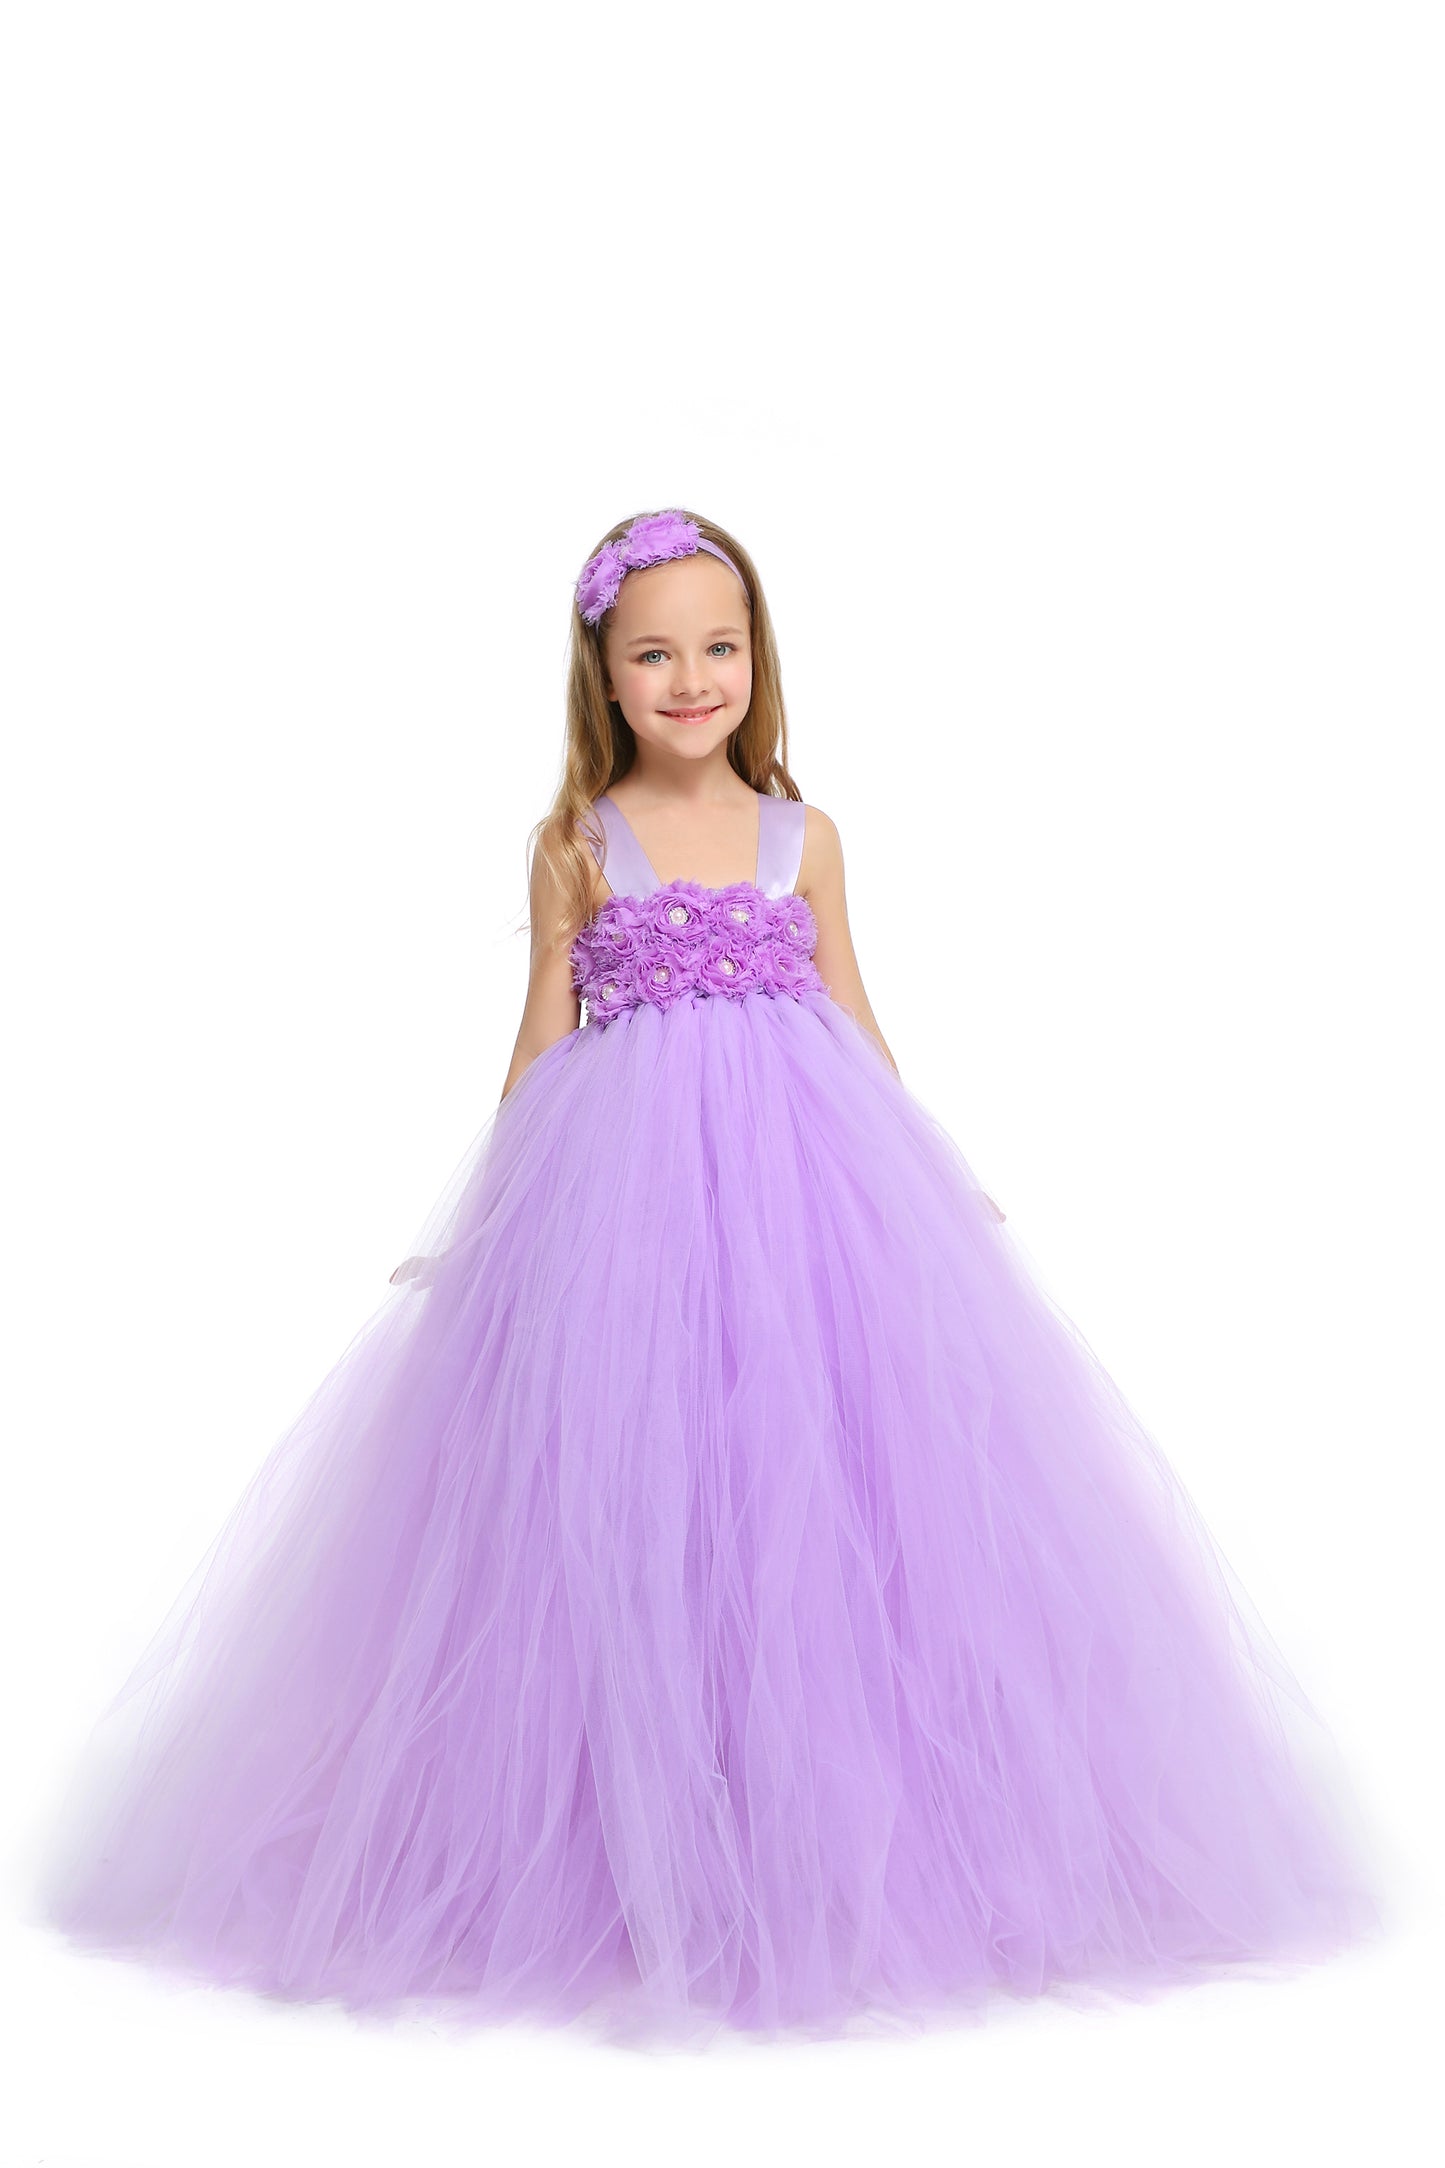 MagicTulleCouture Lavender/Lilac Flower Girl Tutu Dress with Matching Headpiece and Slip